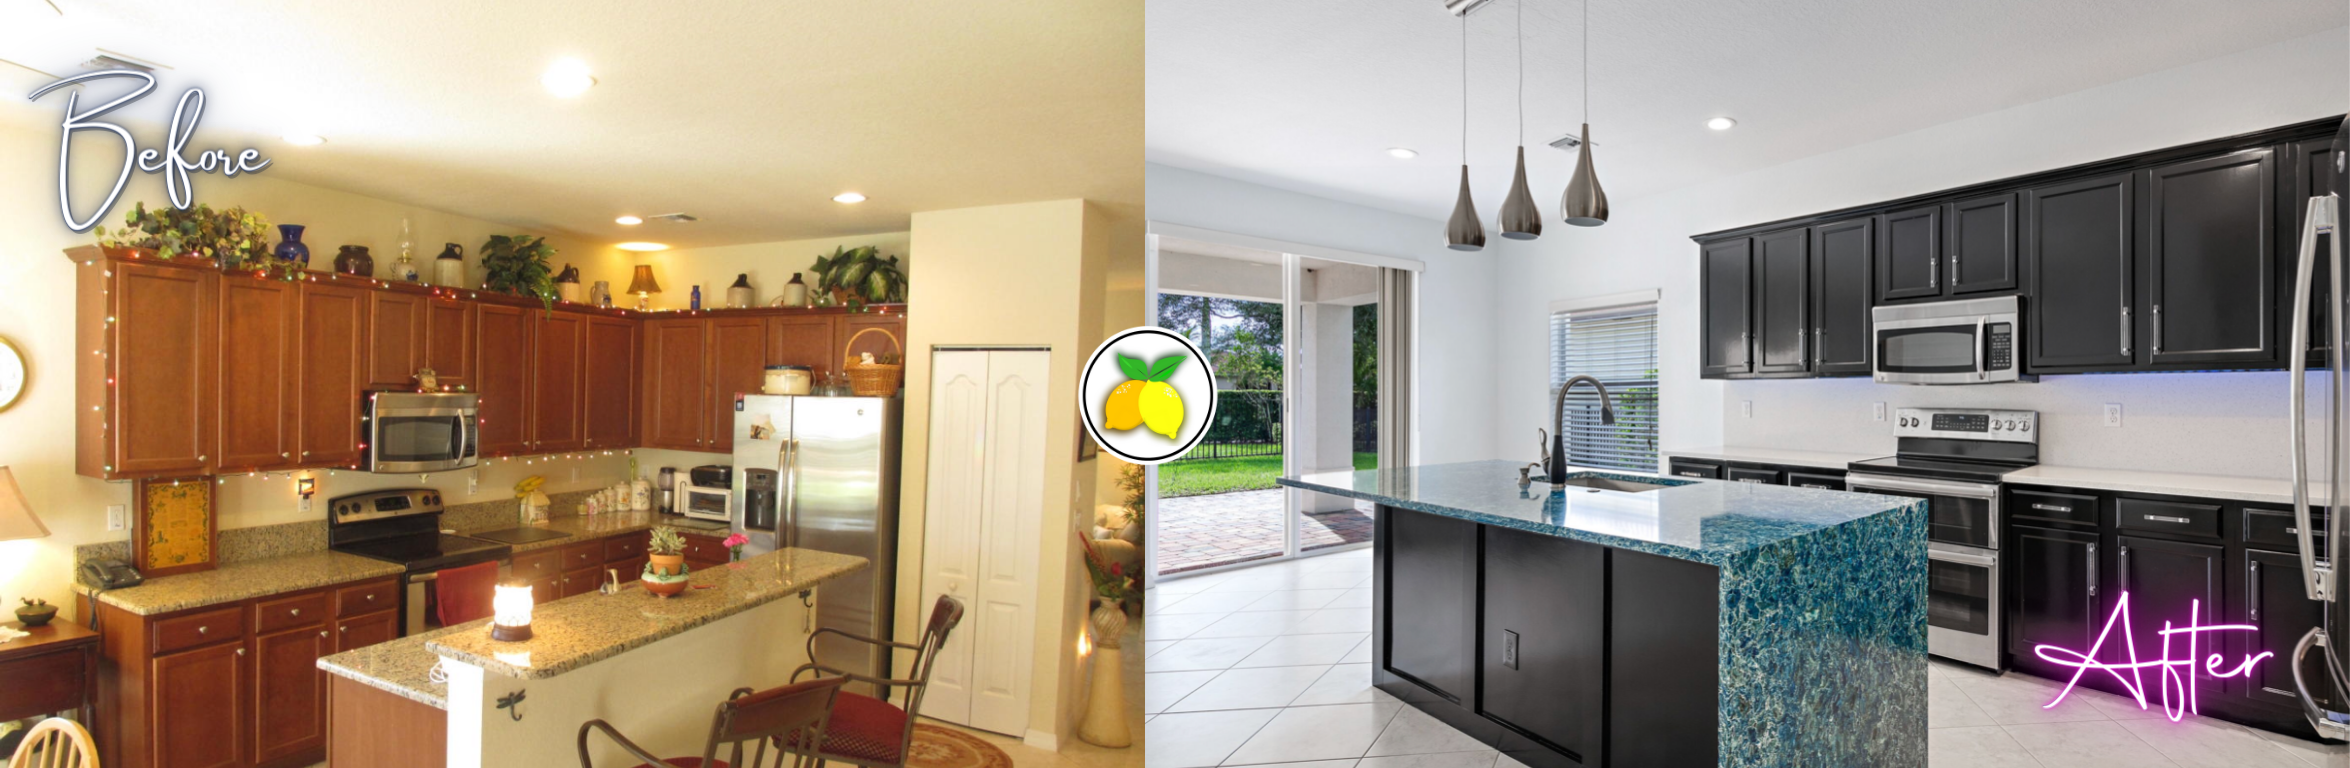 Before and after: Rialto of Jupiter kitchen renovation